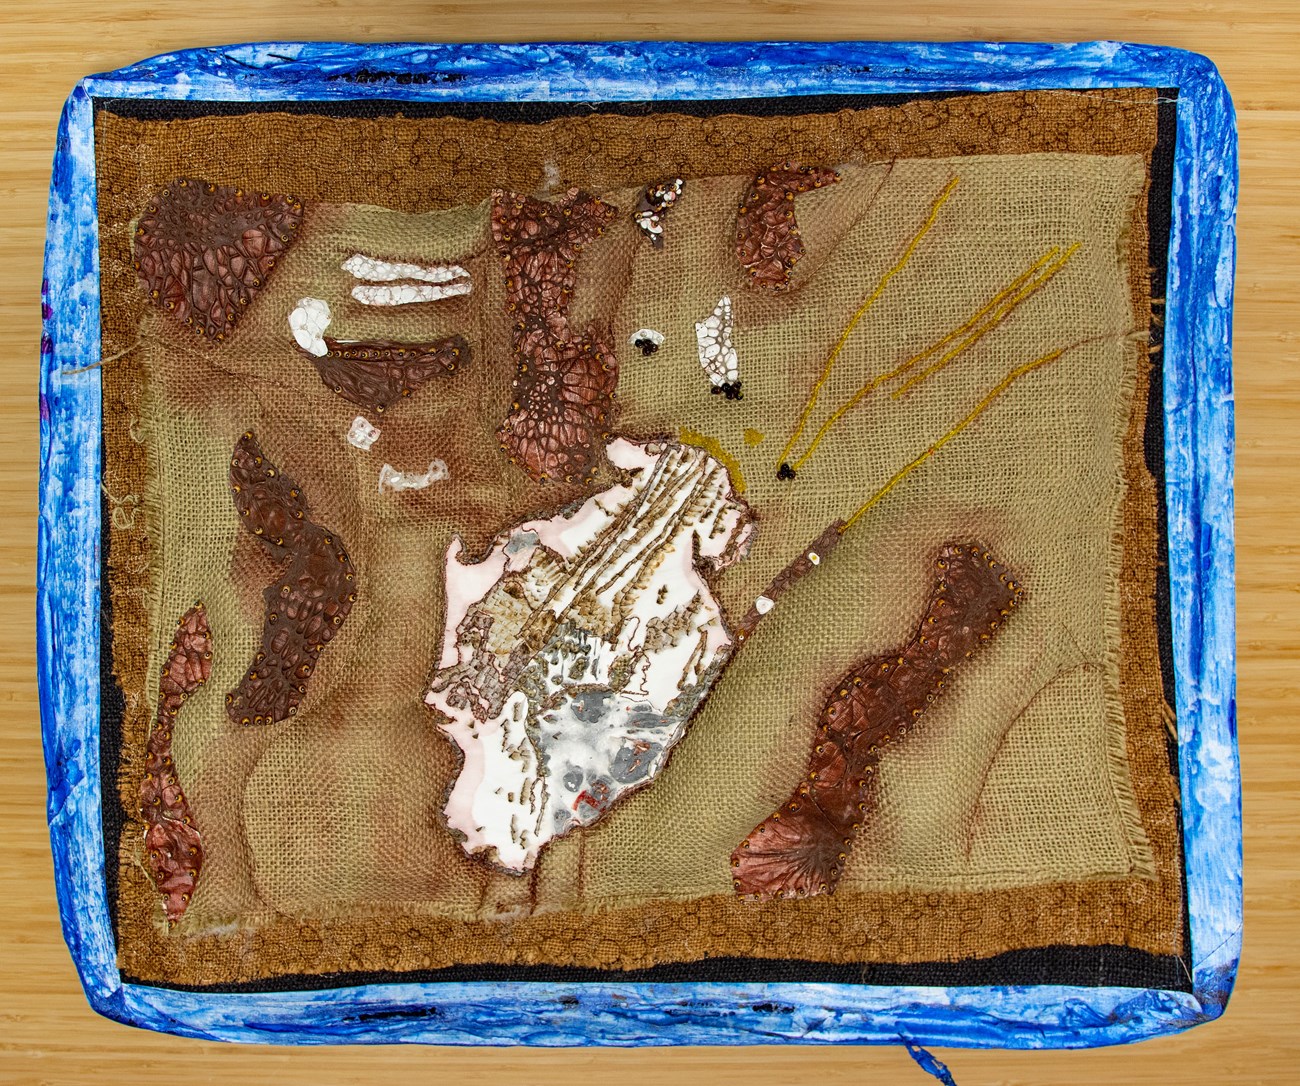 An abstract representation of a mountain glacier made of plastic burlap, and beading, framed in blue tyvec.